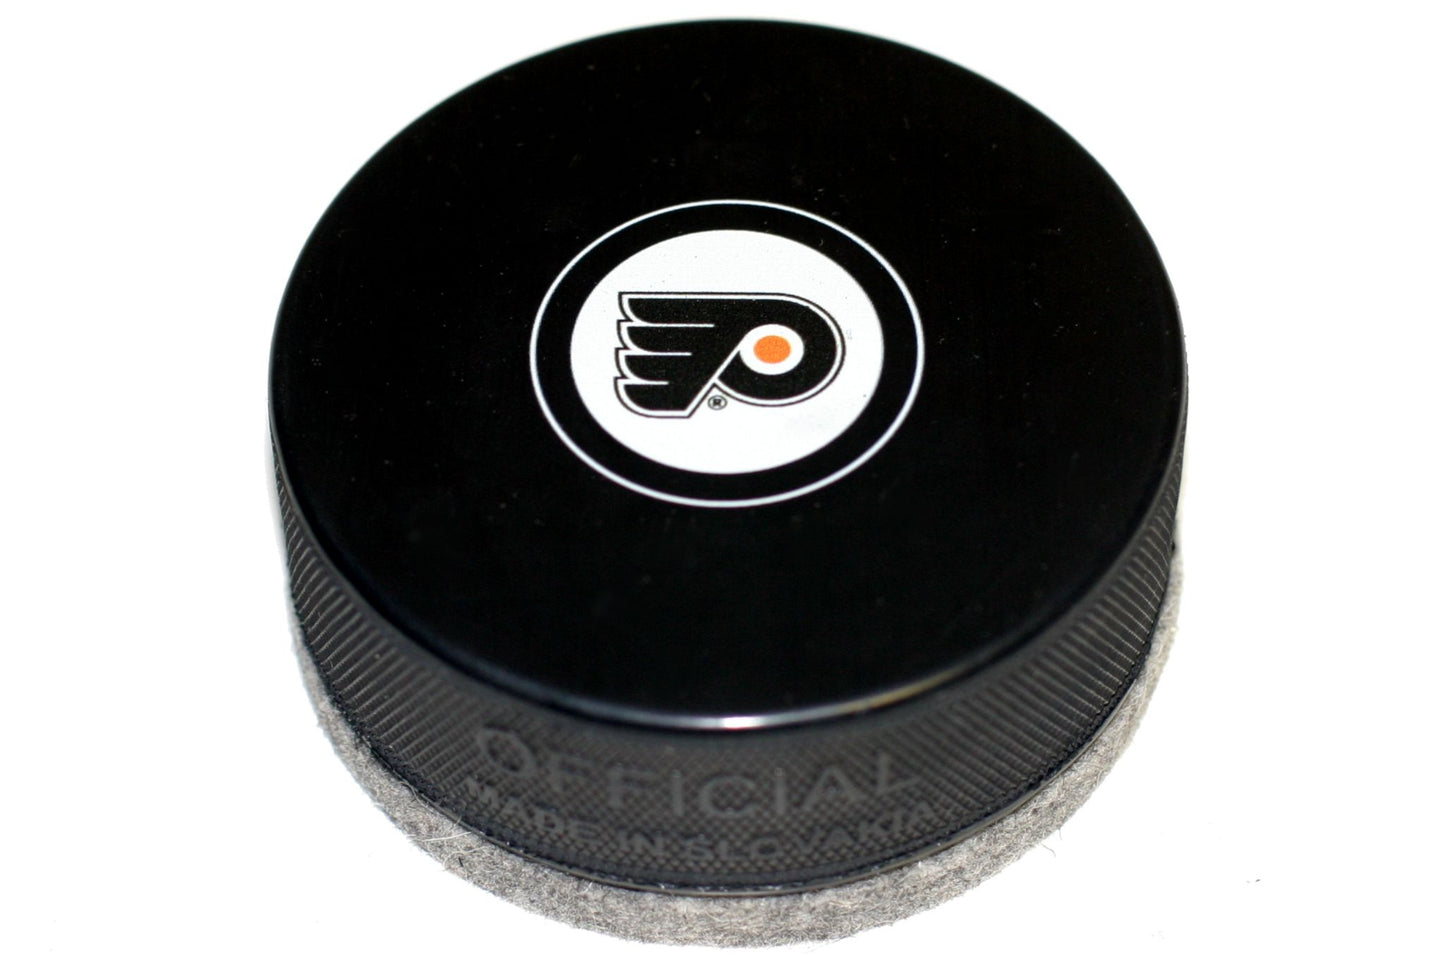 Philadelphia Flyers Autograph Series Hockey Puck Board Eraser For Chalk and Whiteboards